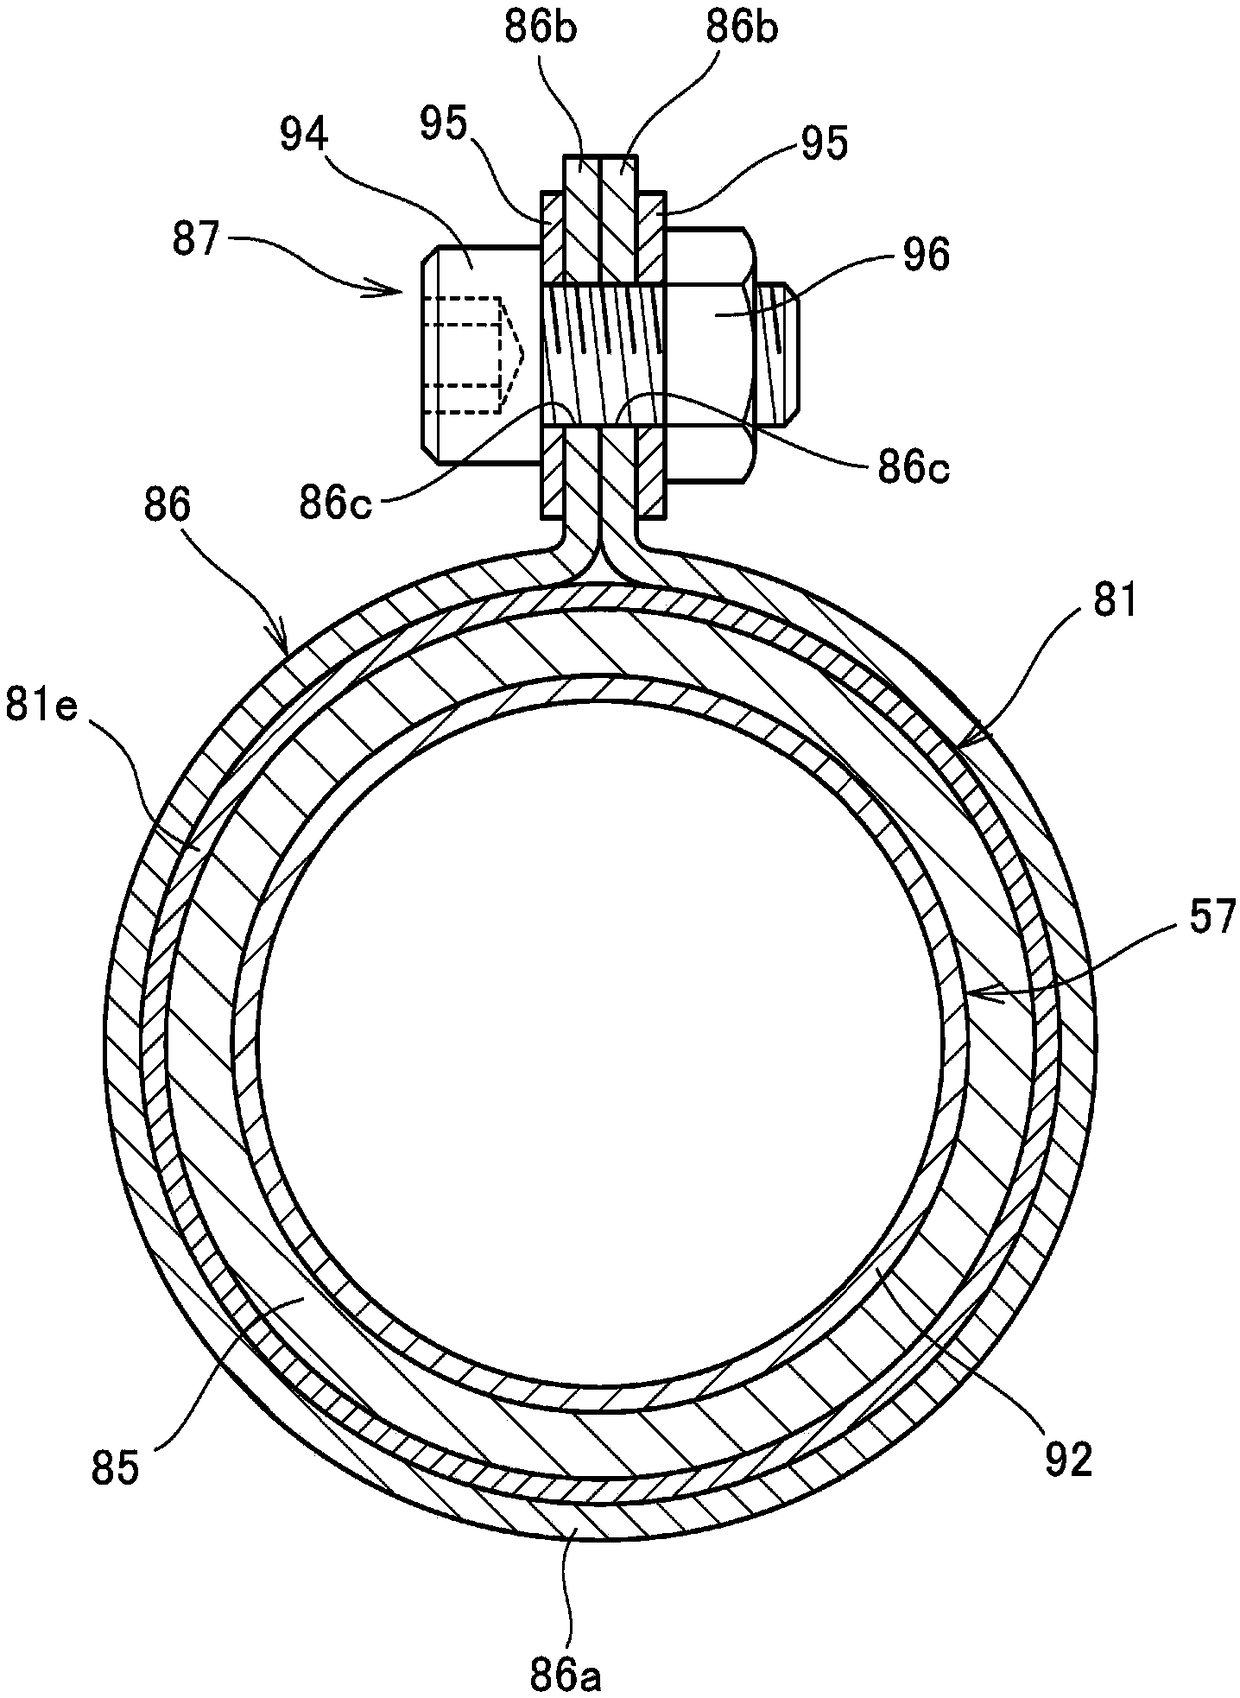 A catalytic converter support structure for an exhaust pipe